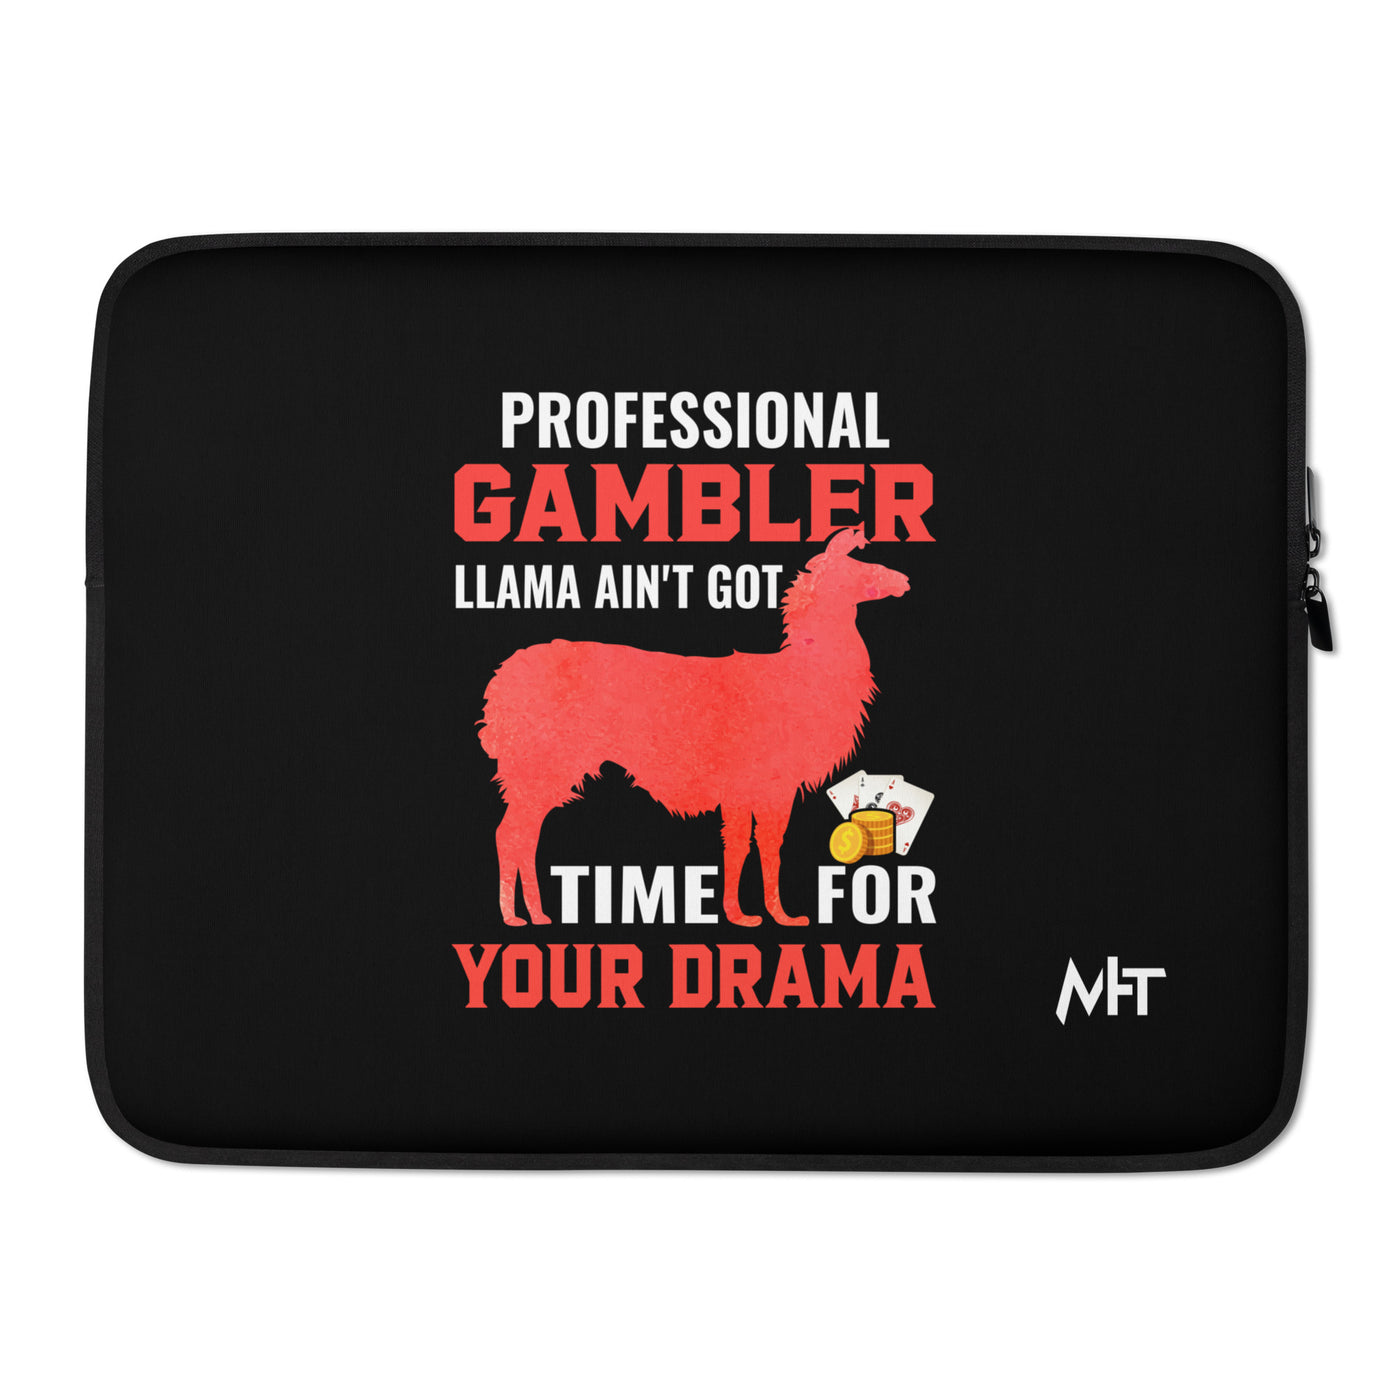 Profession Gambler Llama ain't Got time for your Drama - Laptop Sleeve